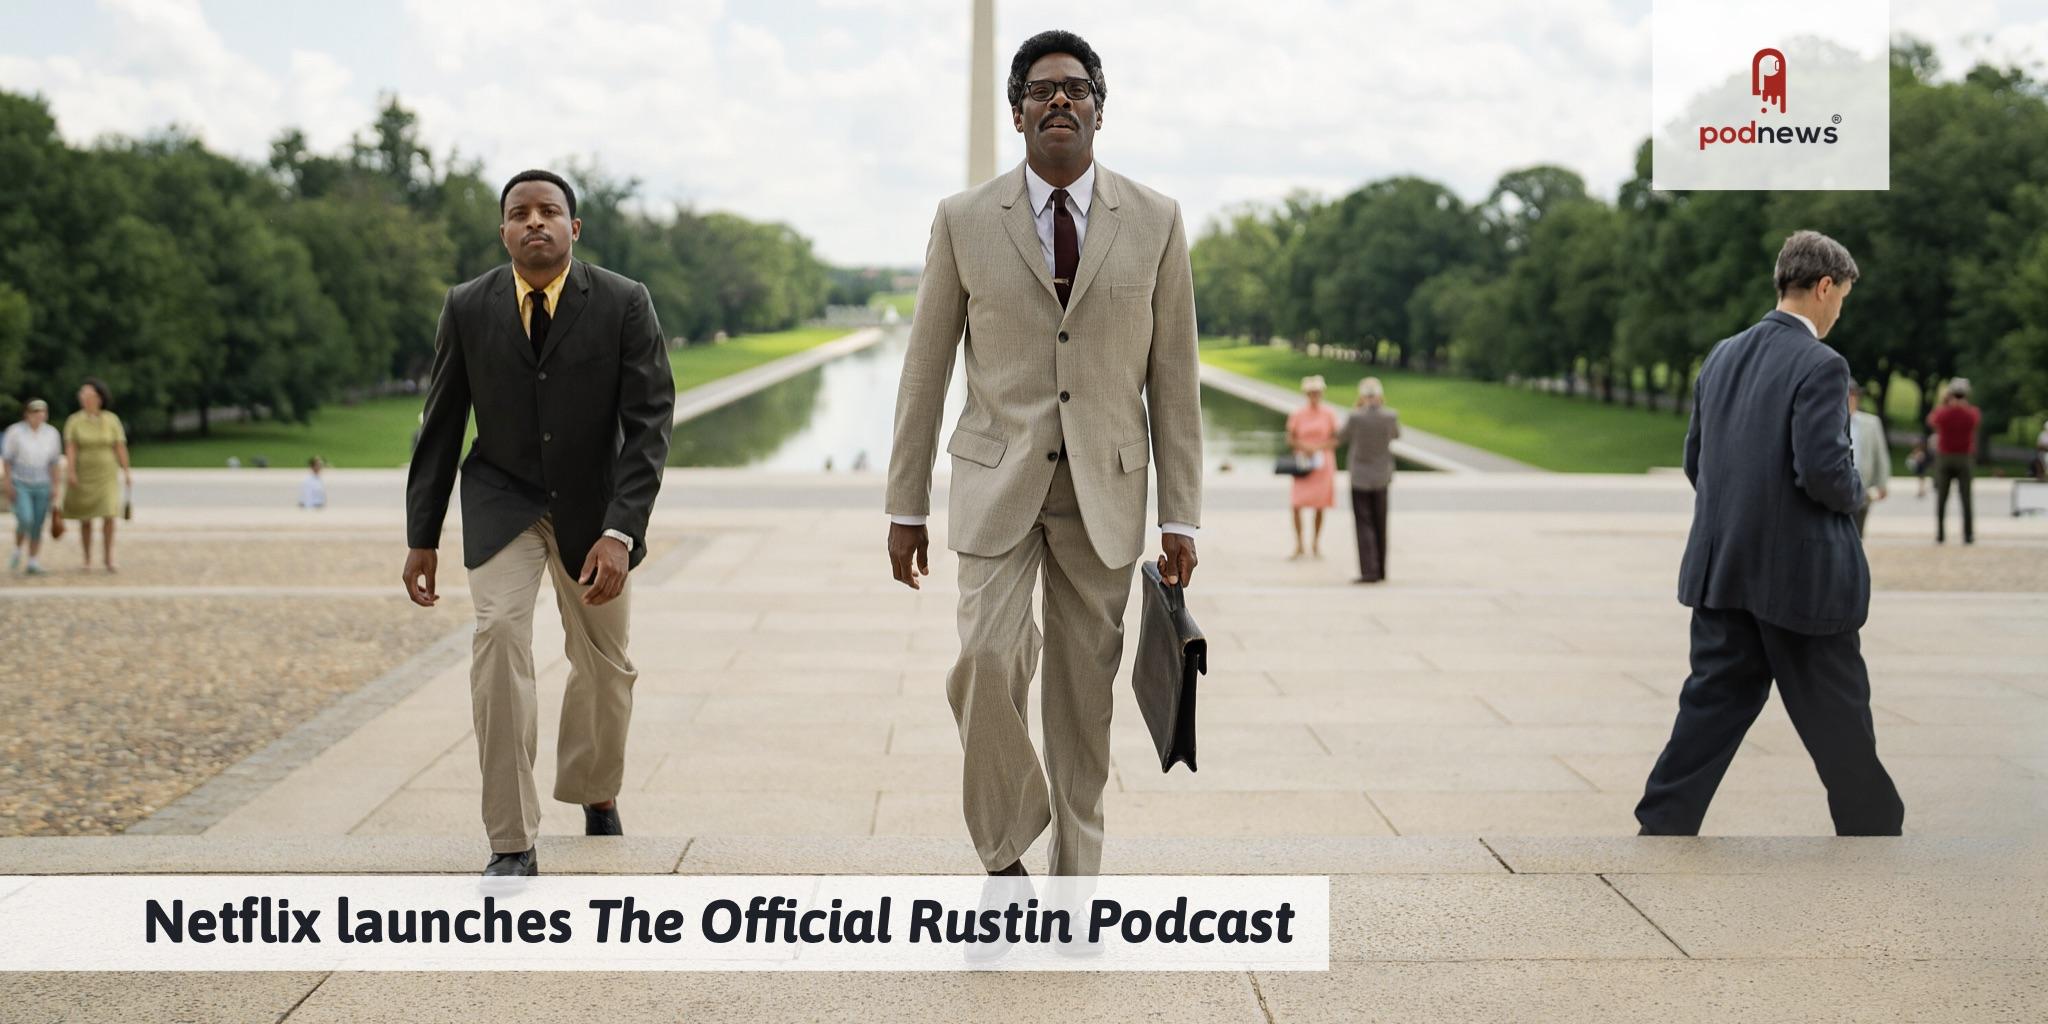 Netflix launches The Official Rustin Podcast